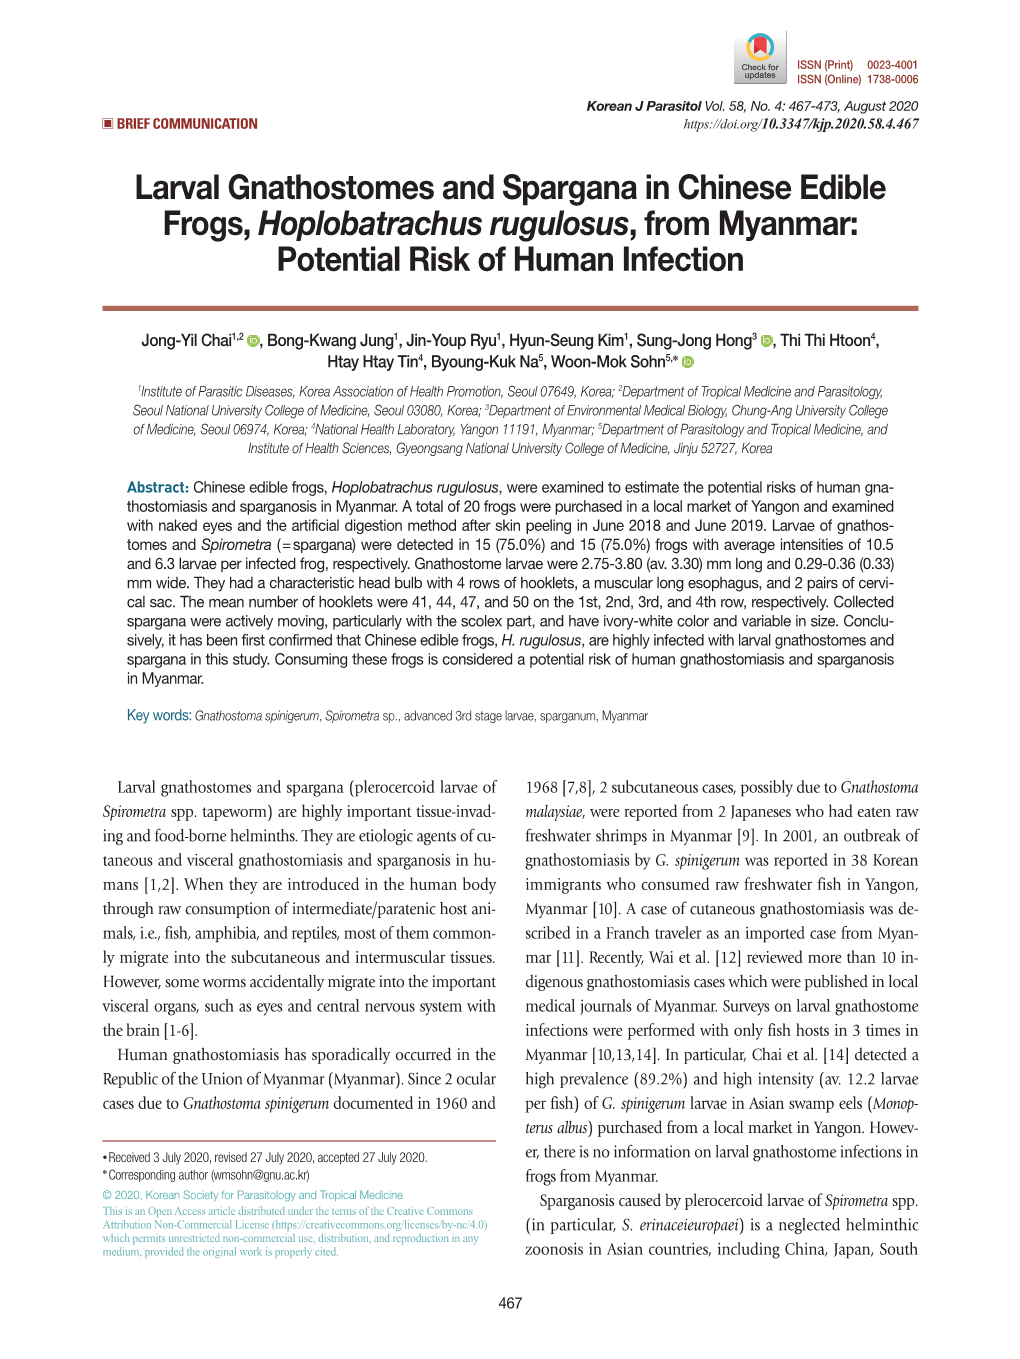 Larval Gnathostomes and Spargana in Chinese Edible Frogs, Hoplobatrachus Rugulosus, from Myanmar: Potential Risk of Human Infection